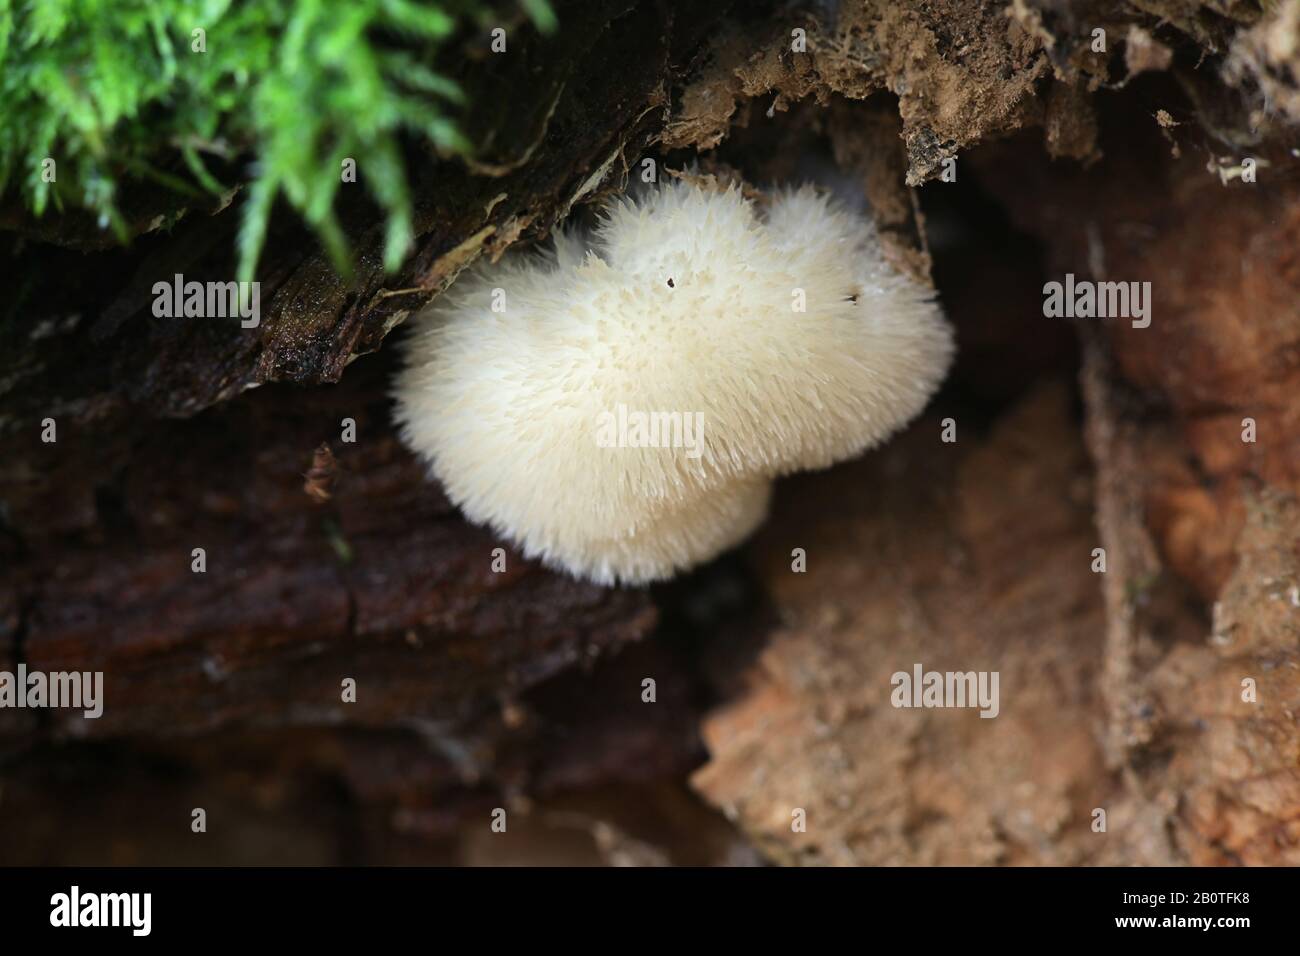 Postia ptychogaster, known as the powderpuff bracket,fungus from Finland Stock Photo